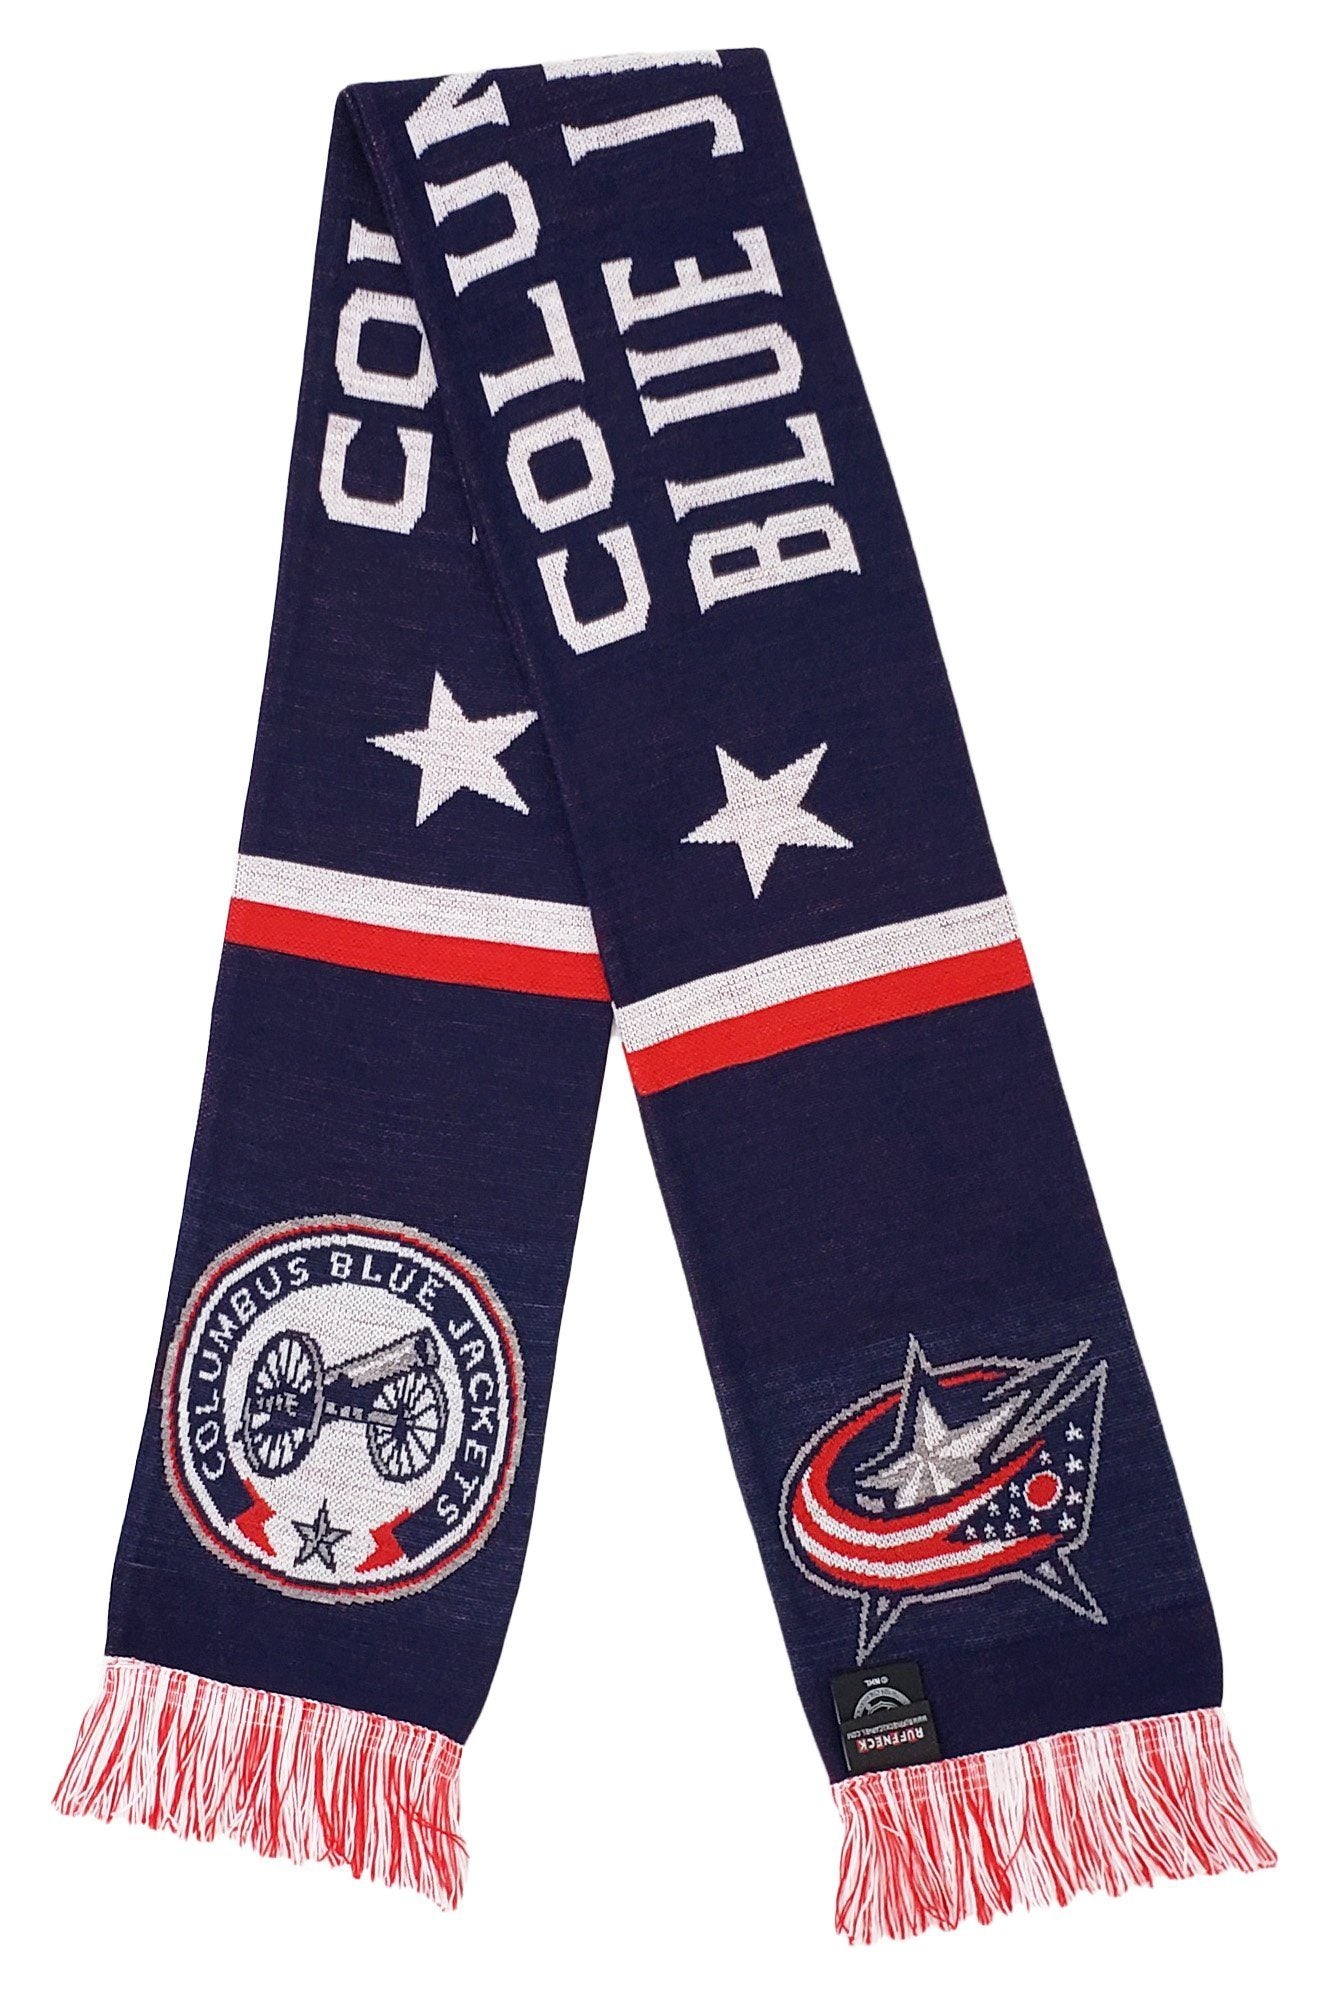 COLUMBUS BLUE JACKETS SCARF - Home Jersey (HD Knit)